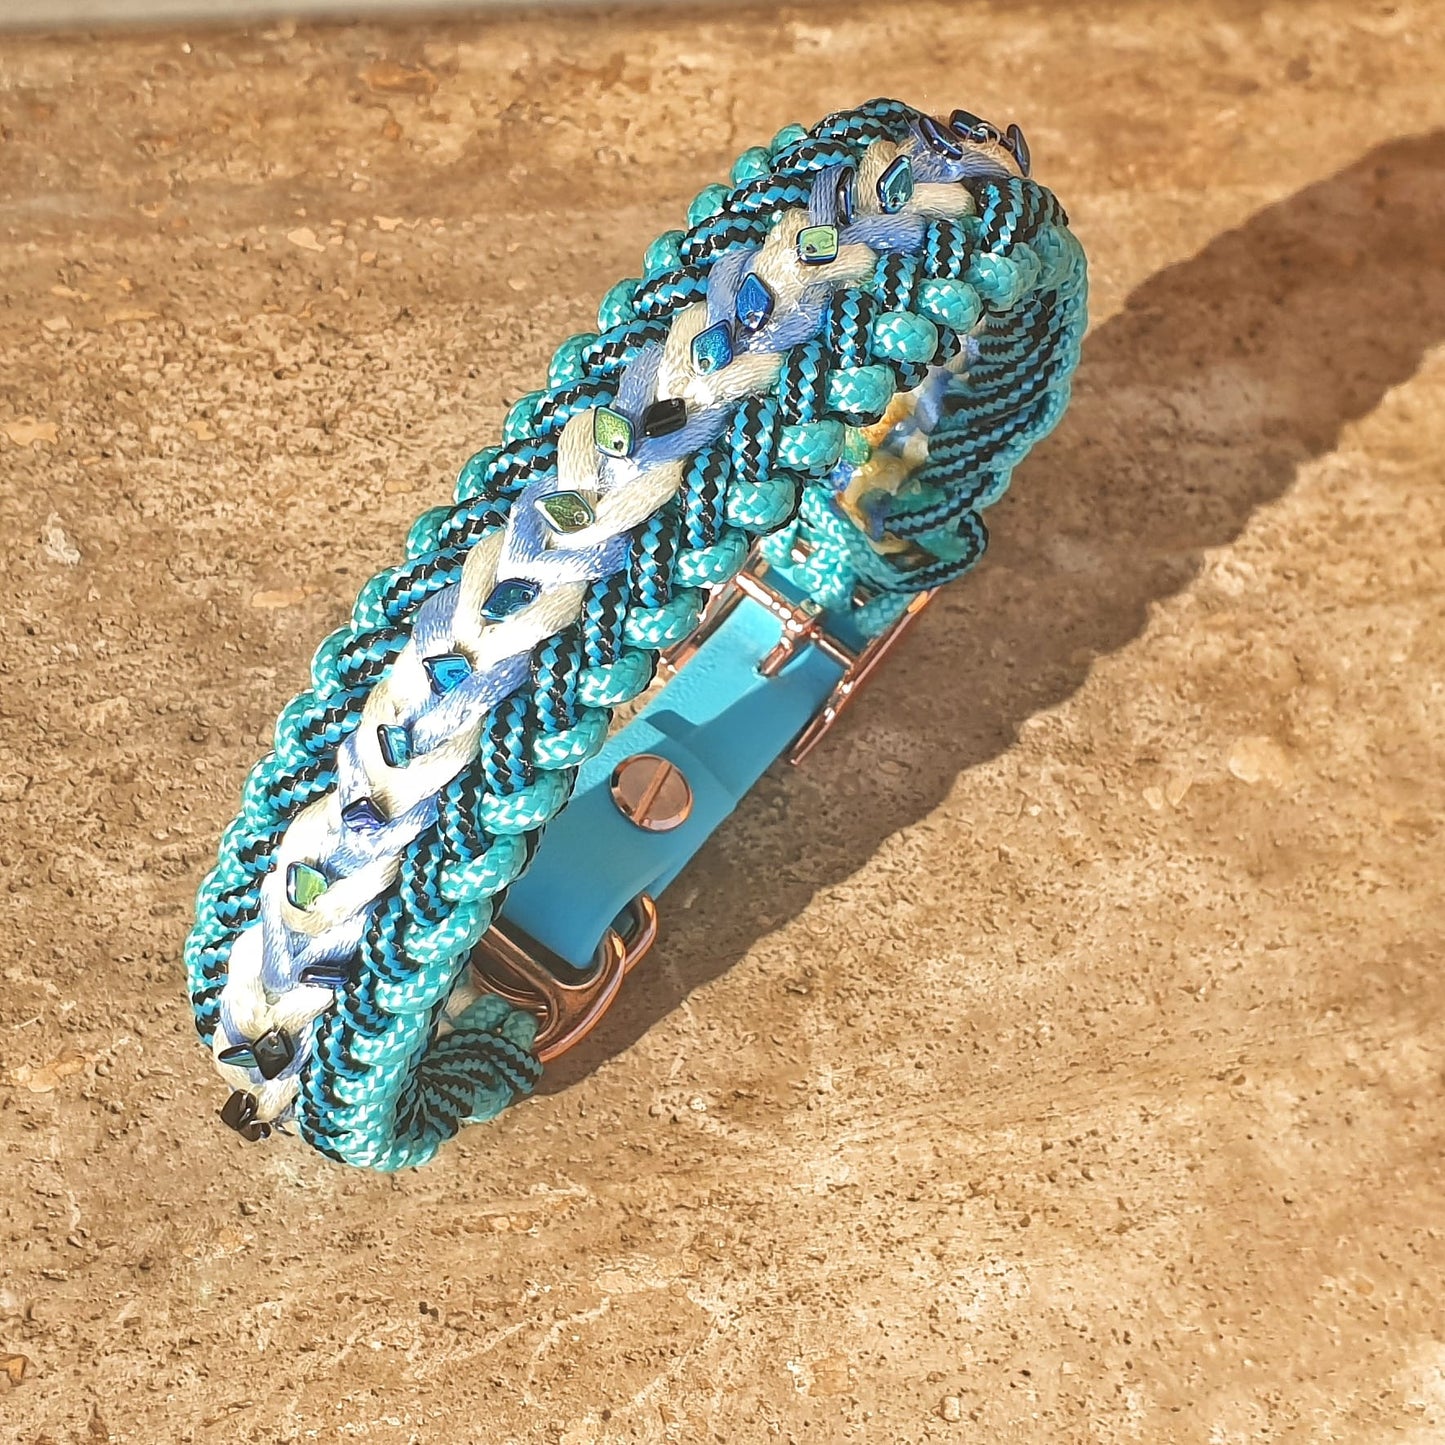 Hand-woven collar and leash with individually sewn beads. Luxury accessories for your Pet.